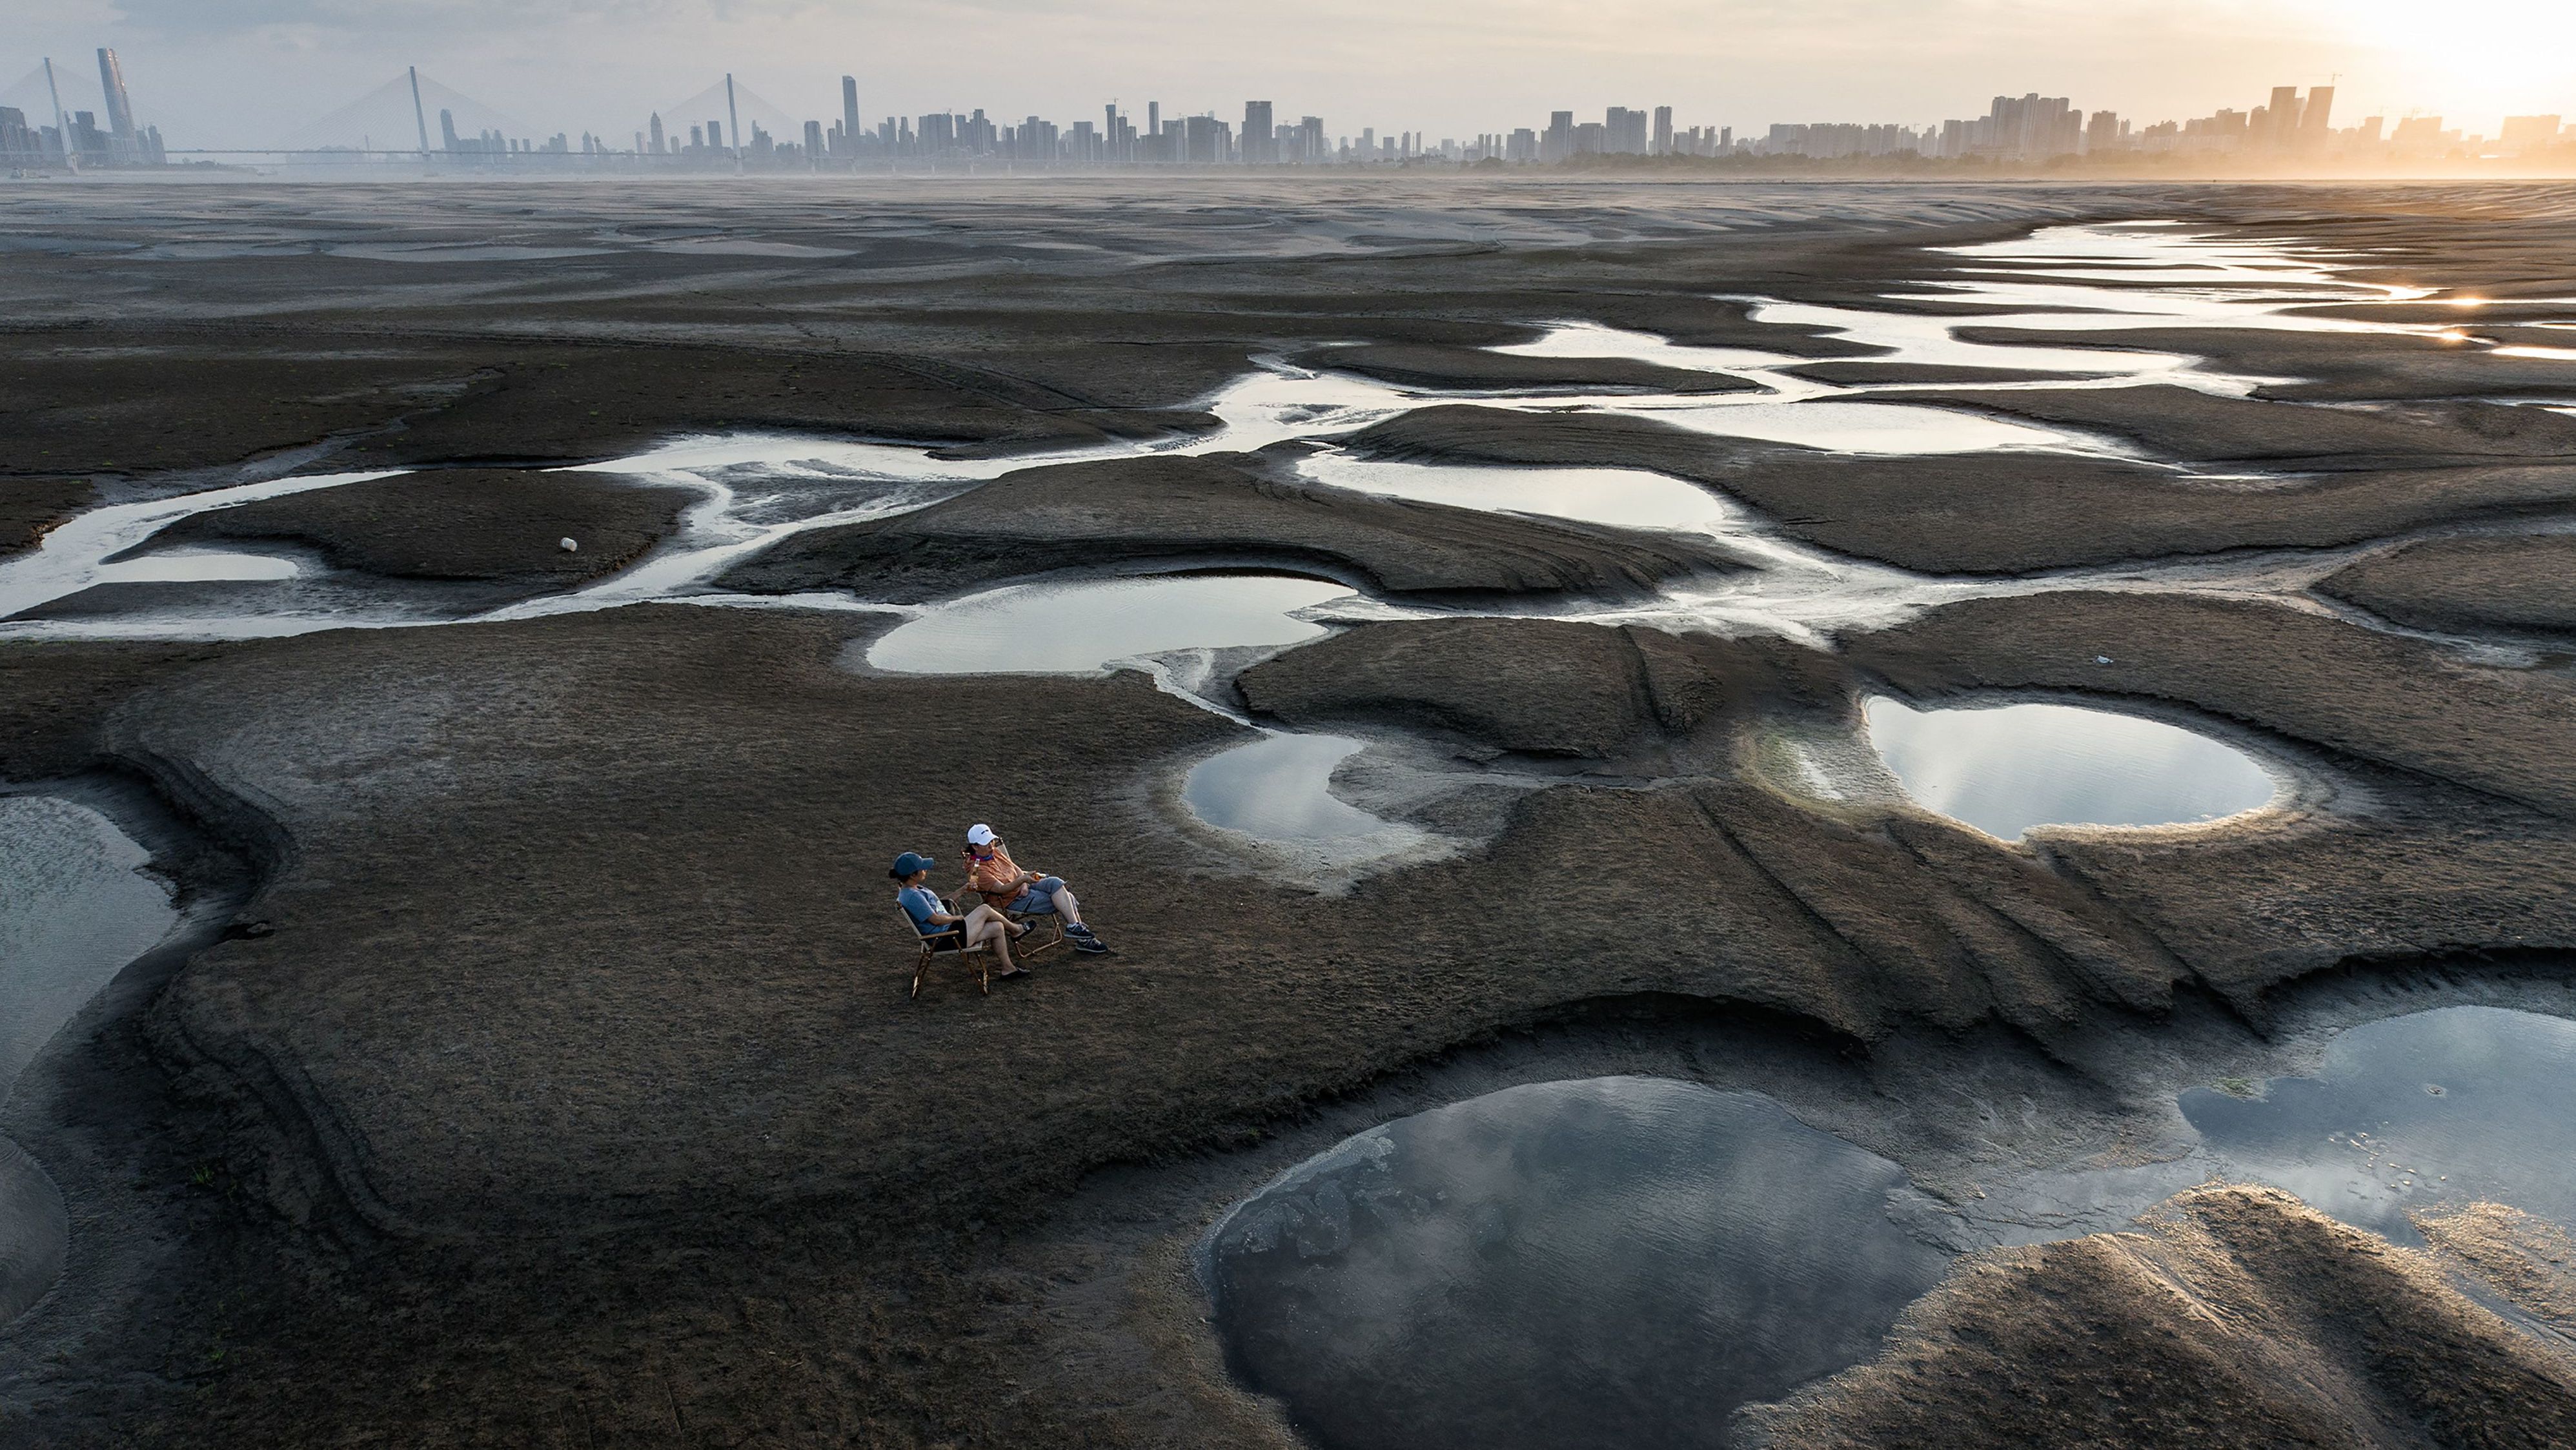 Parts of the Yangtze River have dried up from the extreme heat.